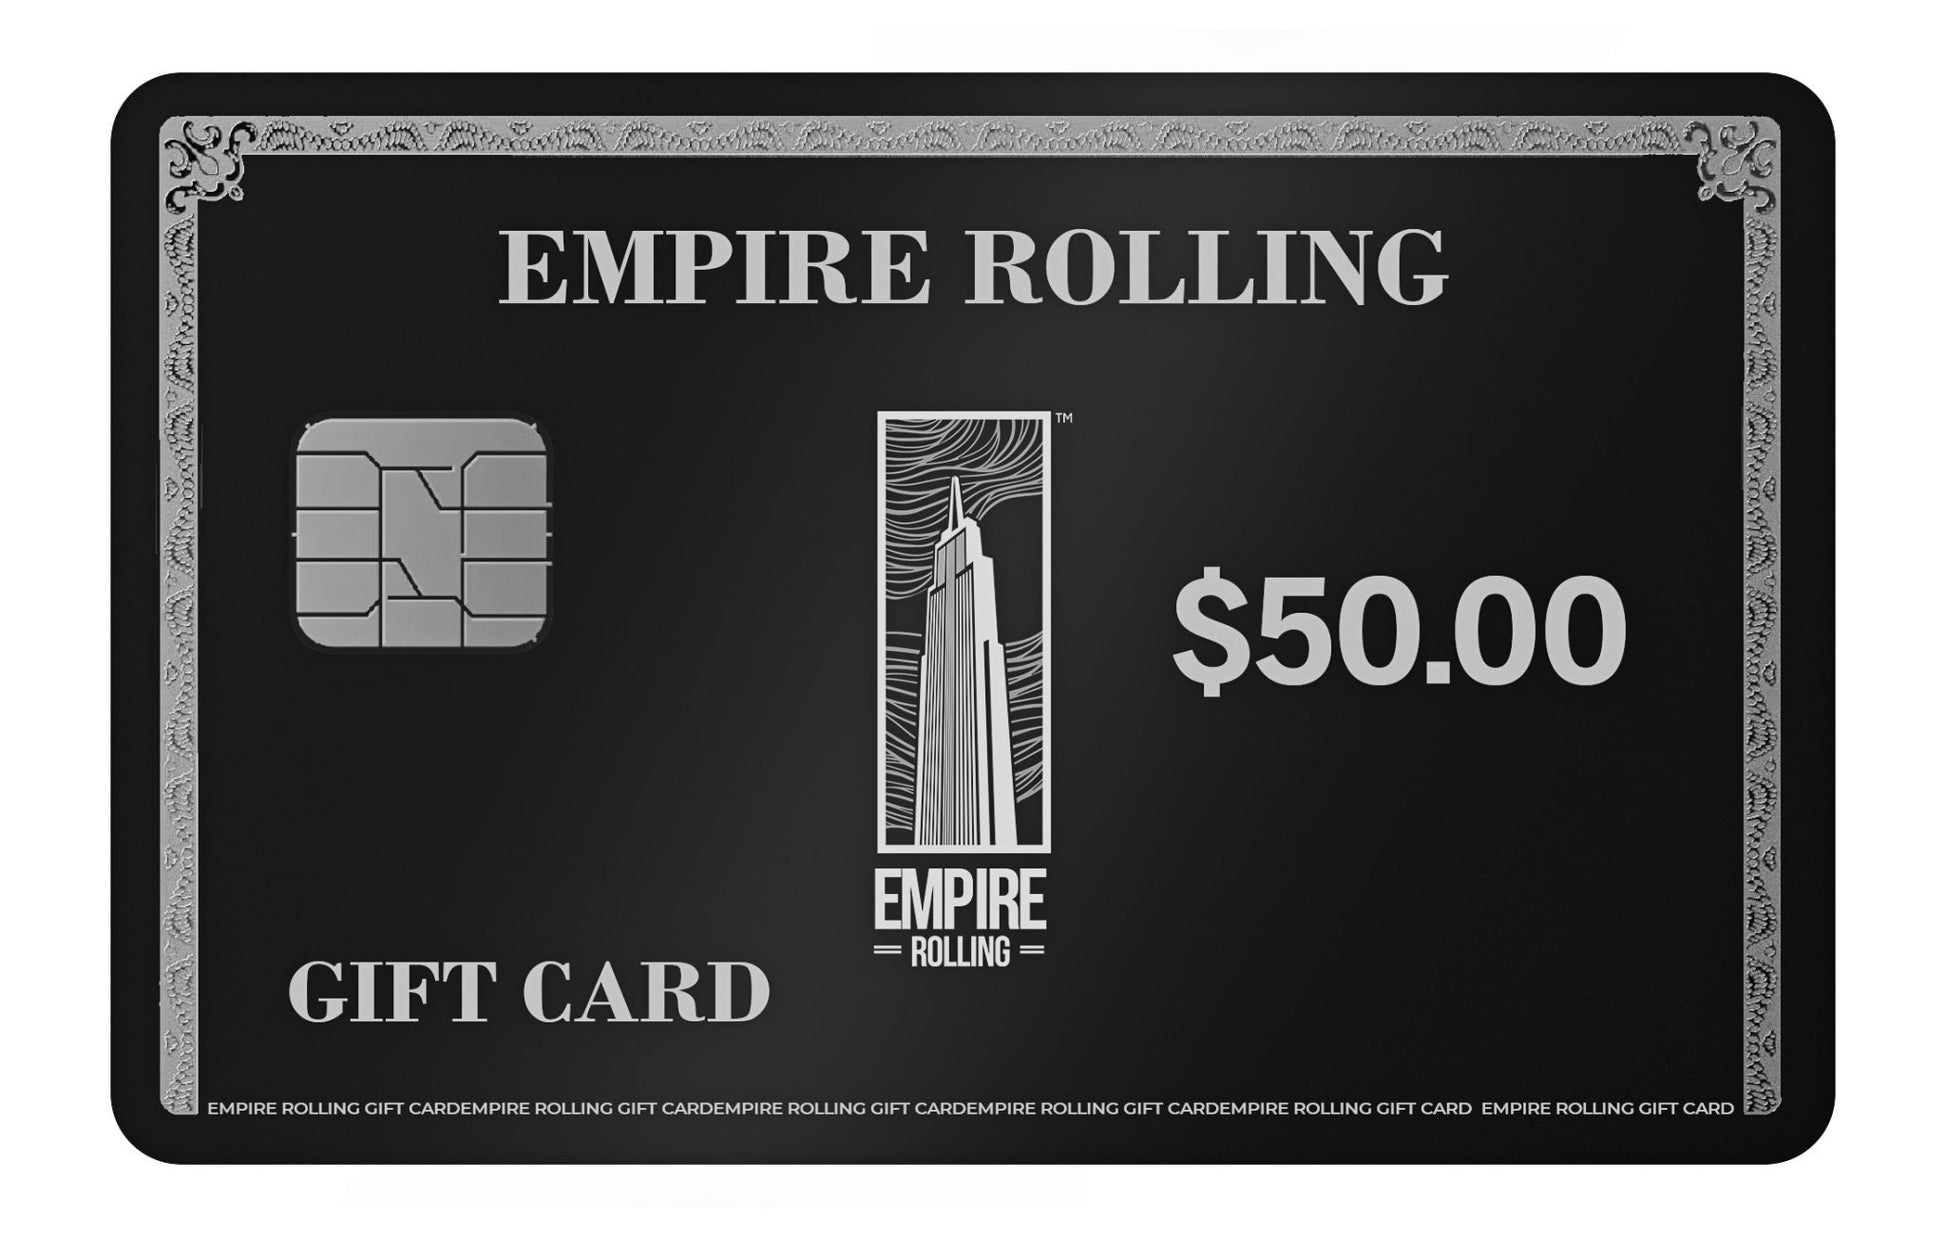 Empire Rolling's King Size Organic Hemp Rolling Papers, eco-friendly and crafted with high-quality, natural materials for a premium smoking experience.Empire Rolling Gift Card - Give the Gift of Choice - Empire Rolling Papers